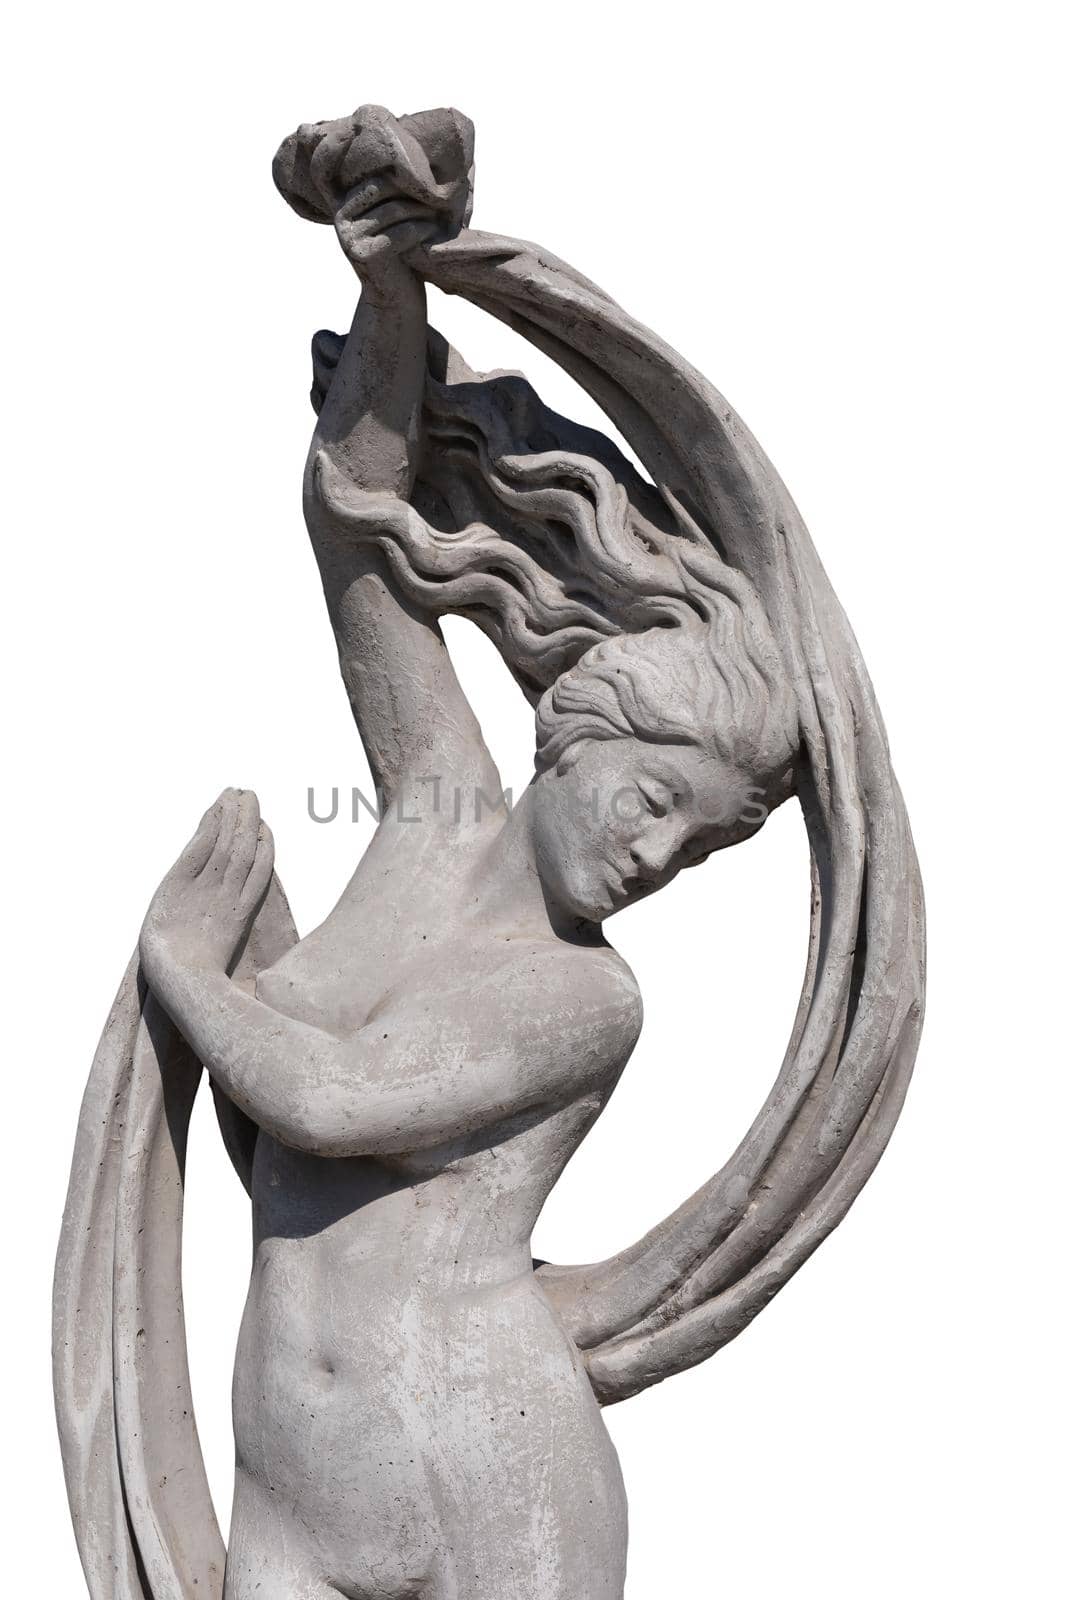 Stone sculpture of upper body of naked woman holding fabric on white background. art and classical style romantic figurative stone sculpture.